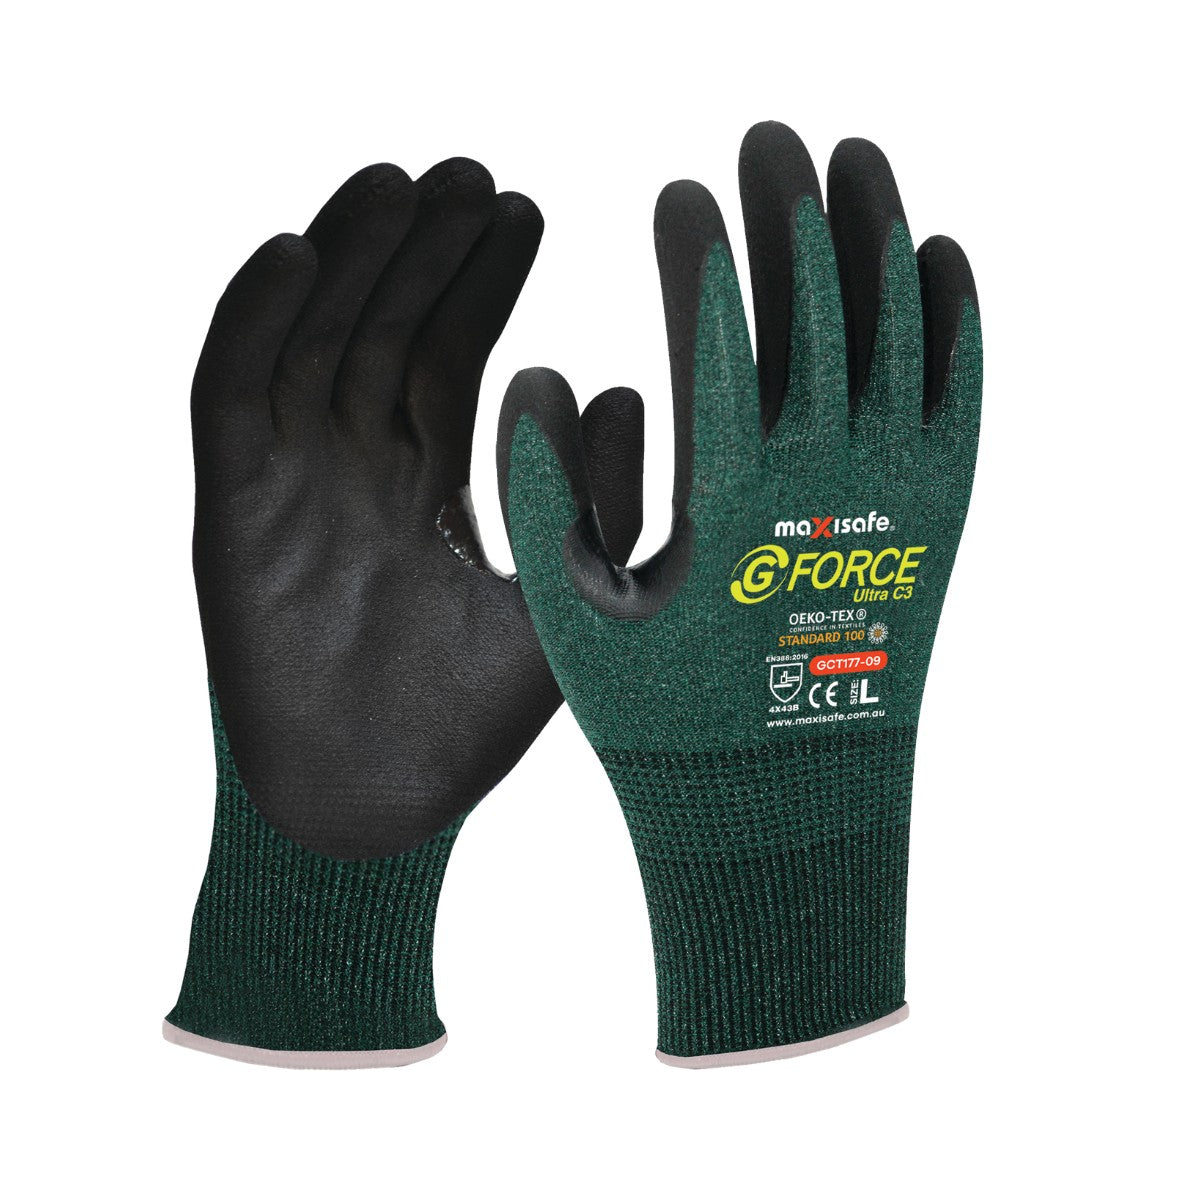 Maxisafe G-Force Ultra C3 Cut Resistant Glove GCT177 (Pack of 12 Pairs)